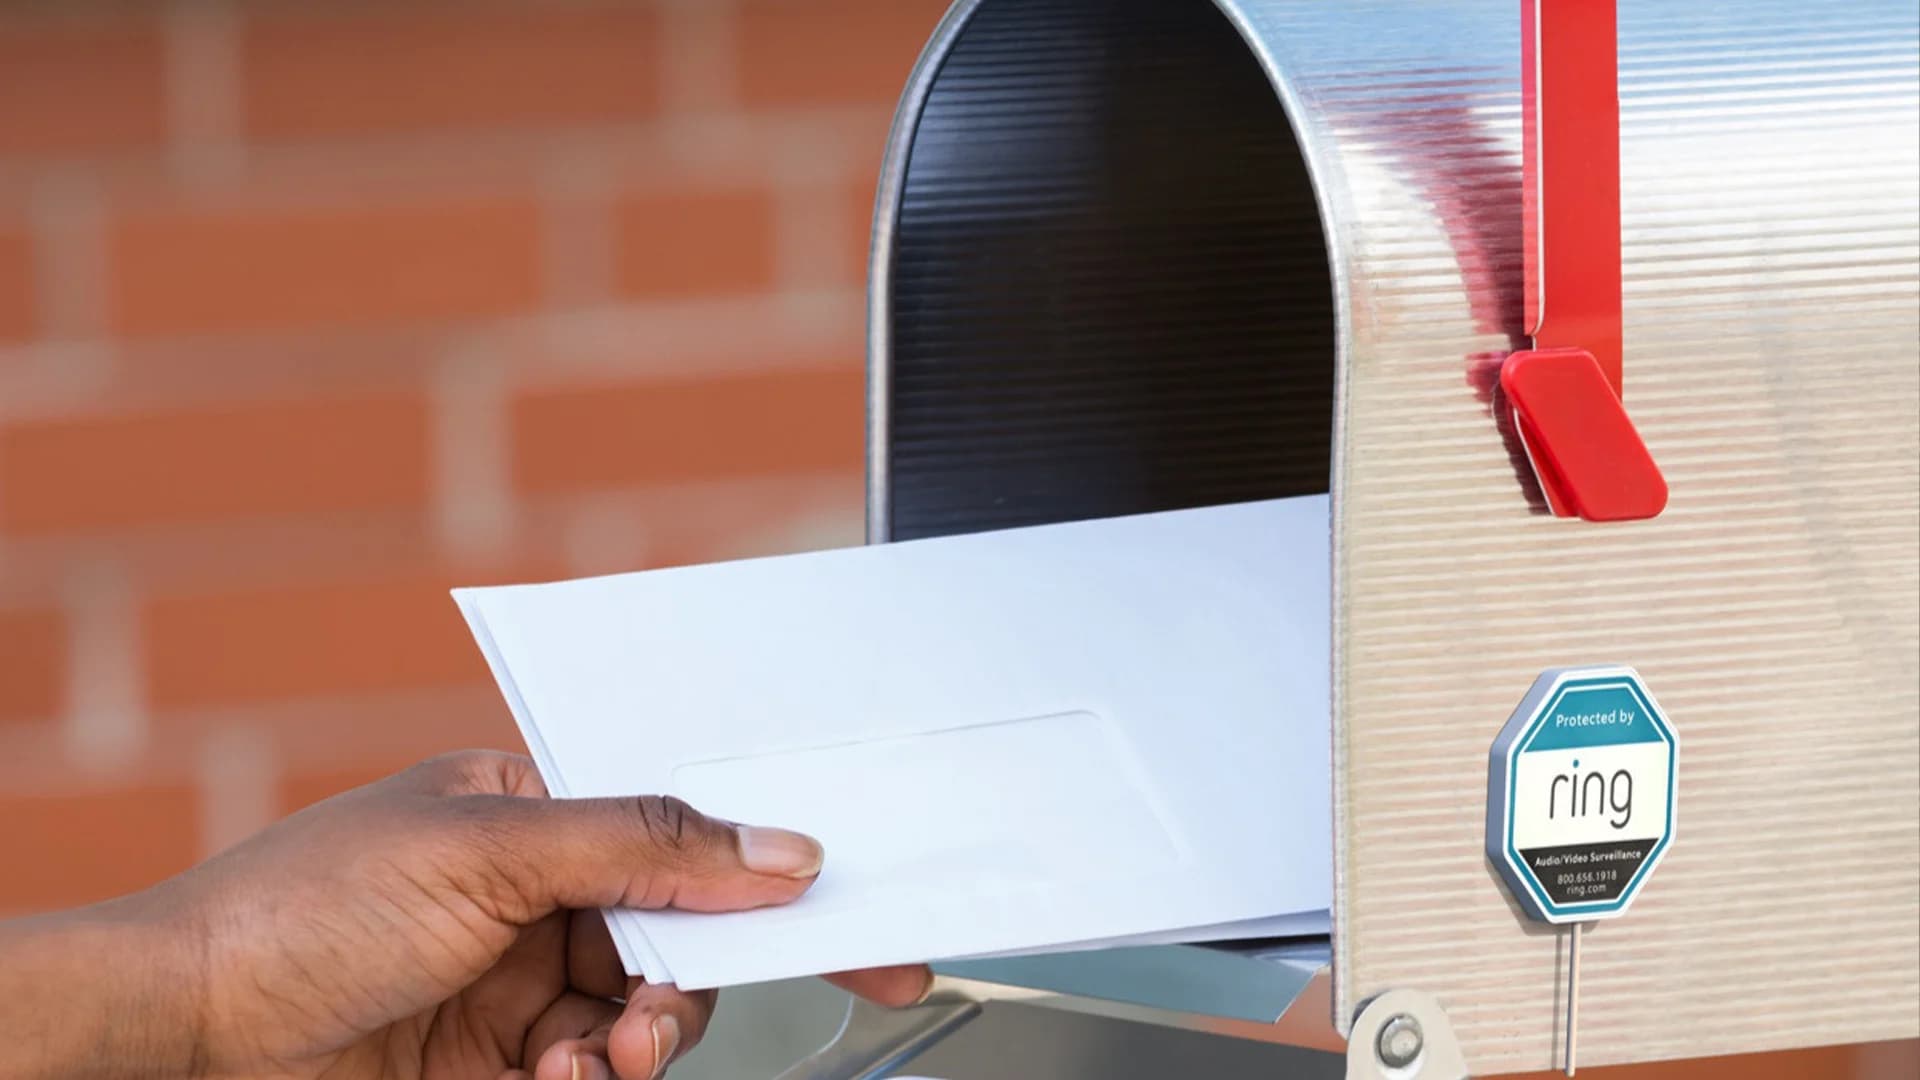 8 tips to help prevent mail thefts